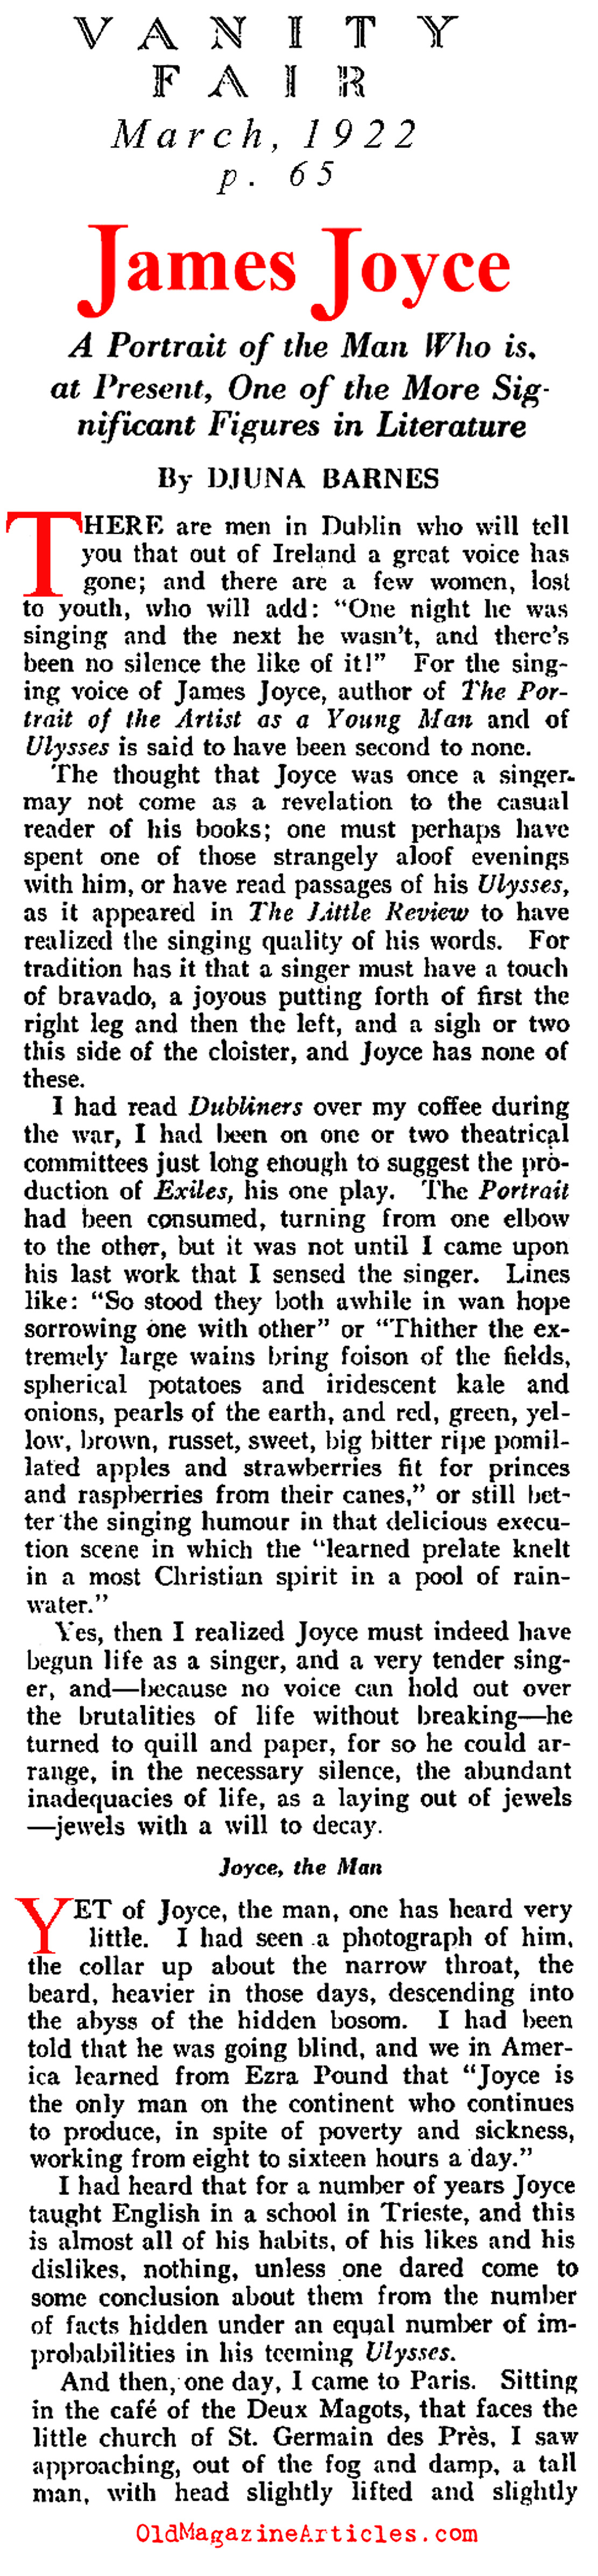 An Interview With James Joyce (Vanity Fair, 1922)